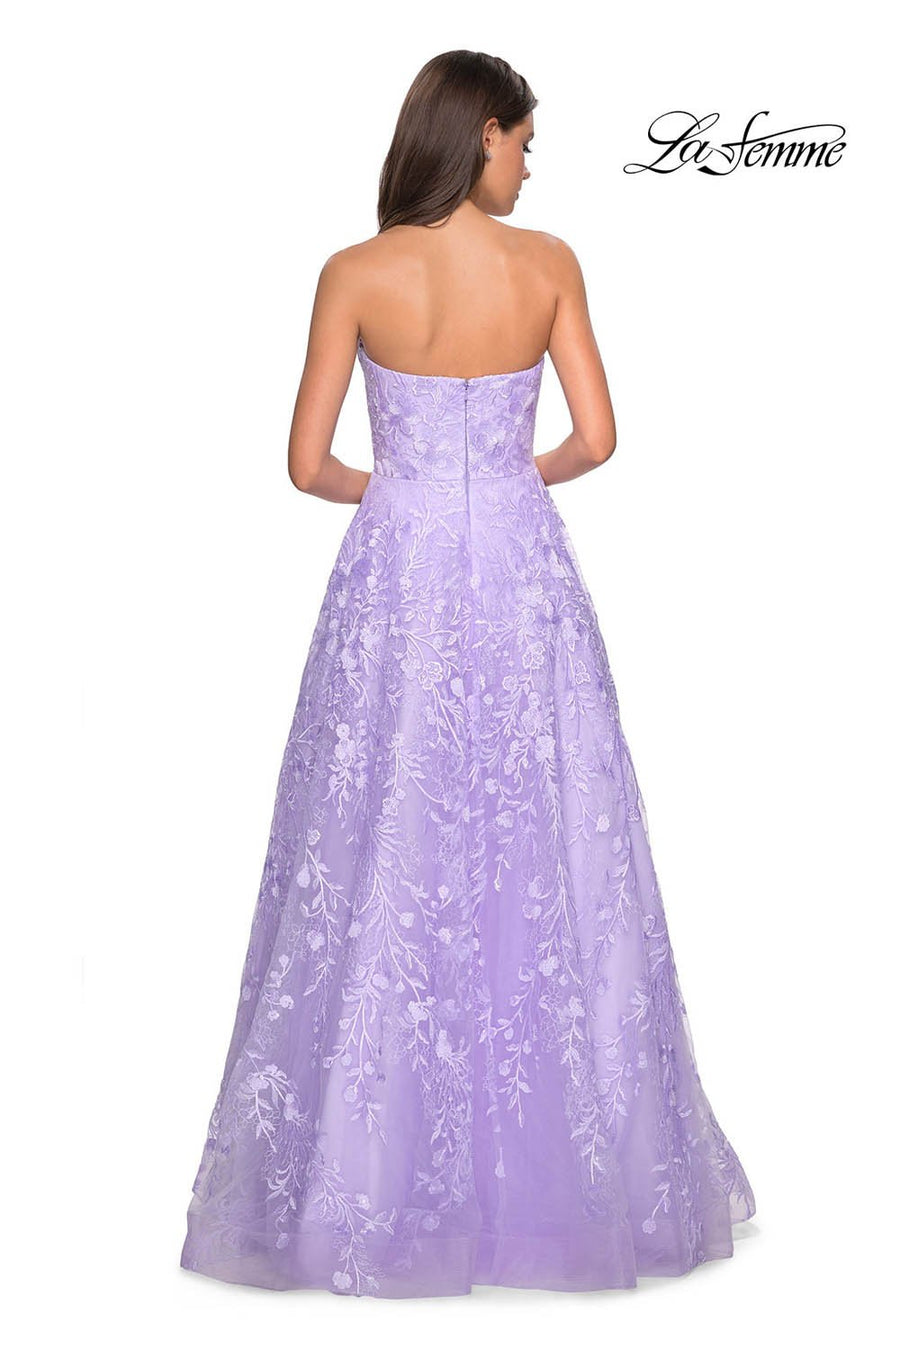 La Femme 27746 prom dress images.  La Femme 27746 is available in these colors: Burgundy, Cloud Blue, Lavender, Navy, Yellow.